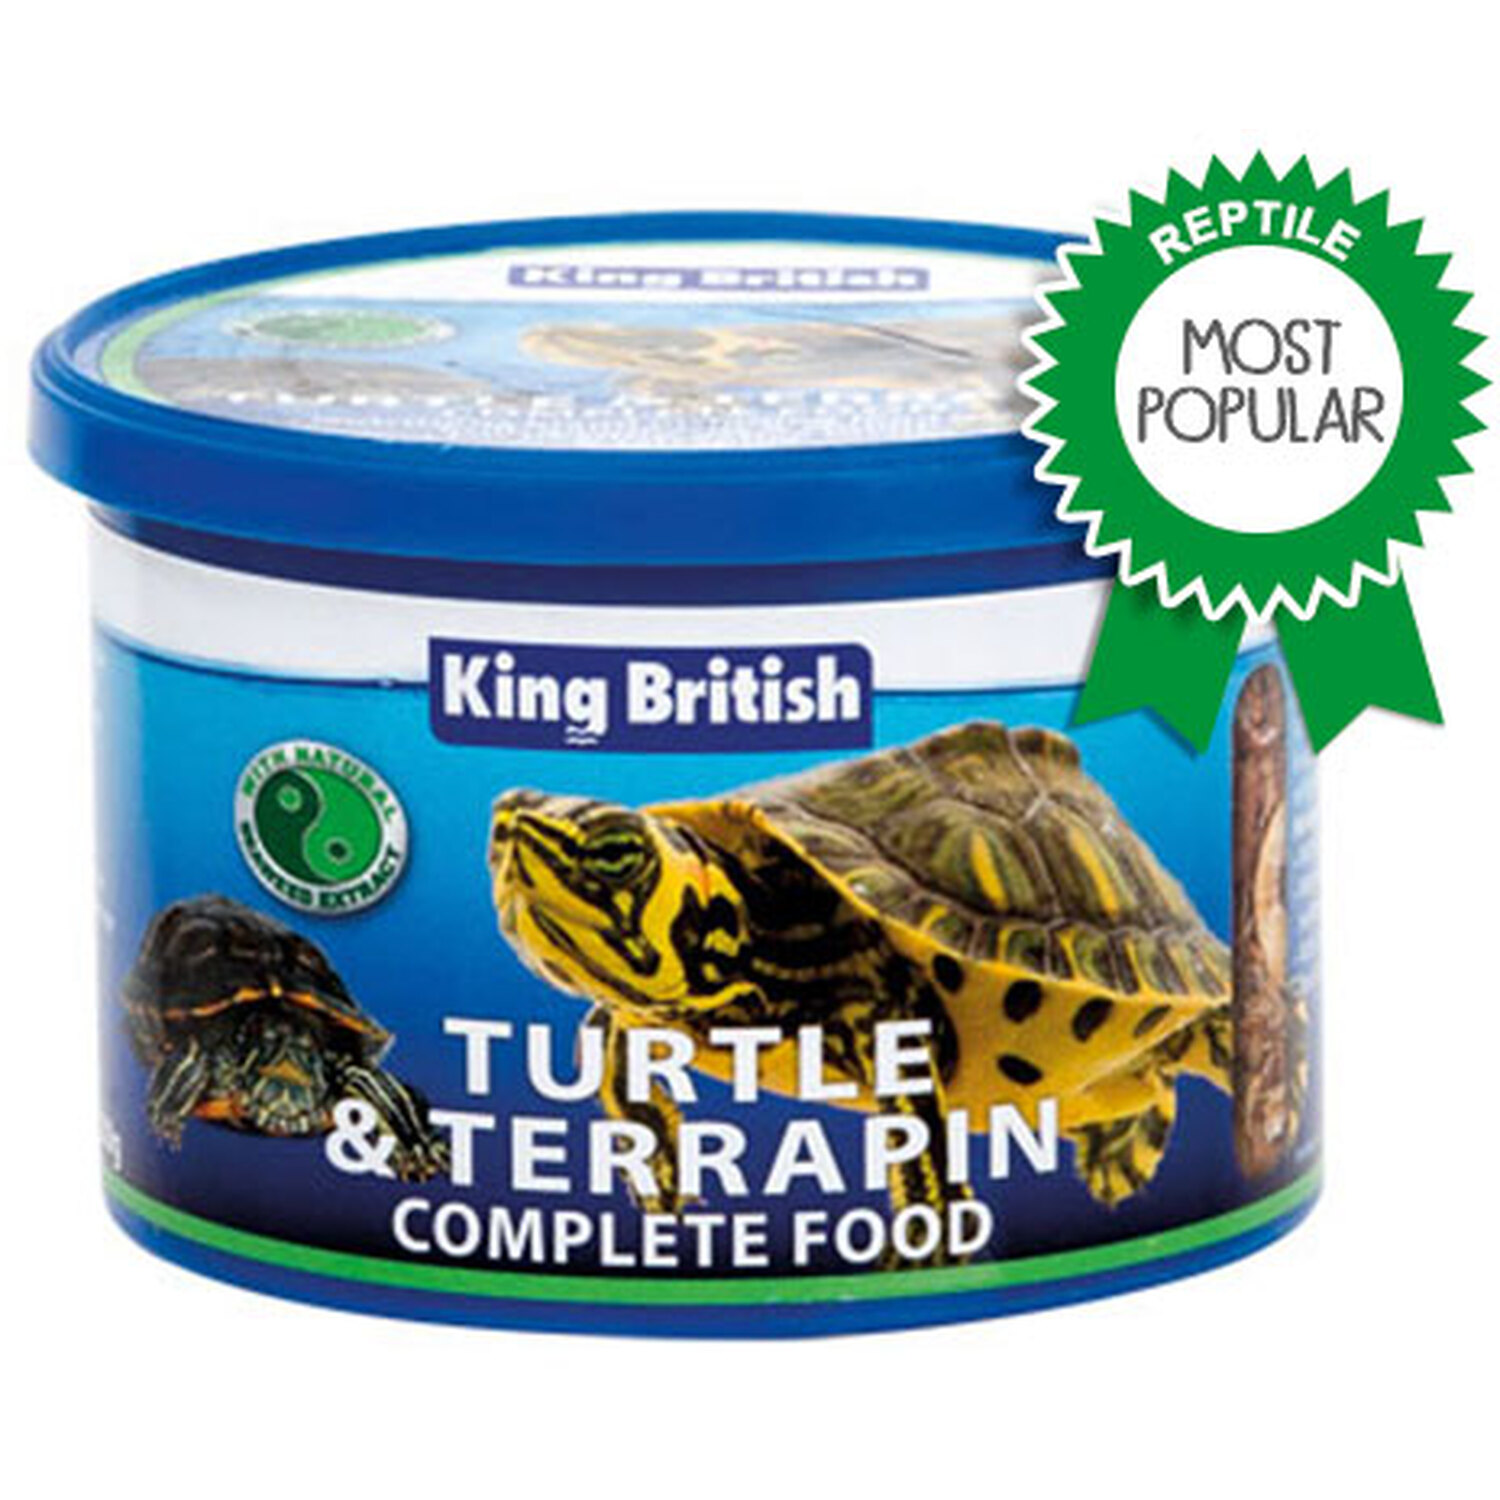 King British Turtle and Terrapin Complete Food 20g Image